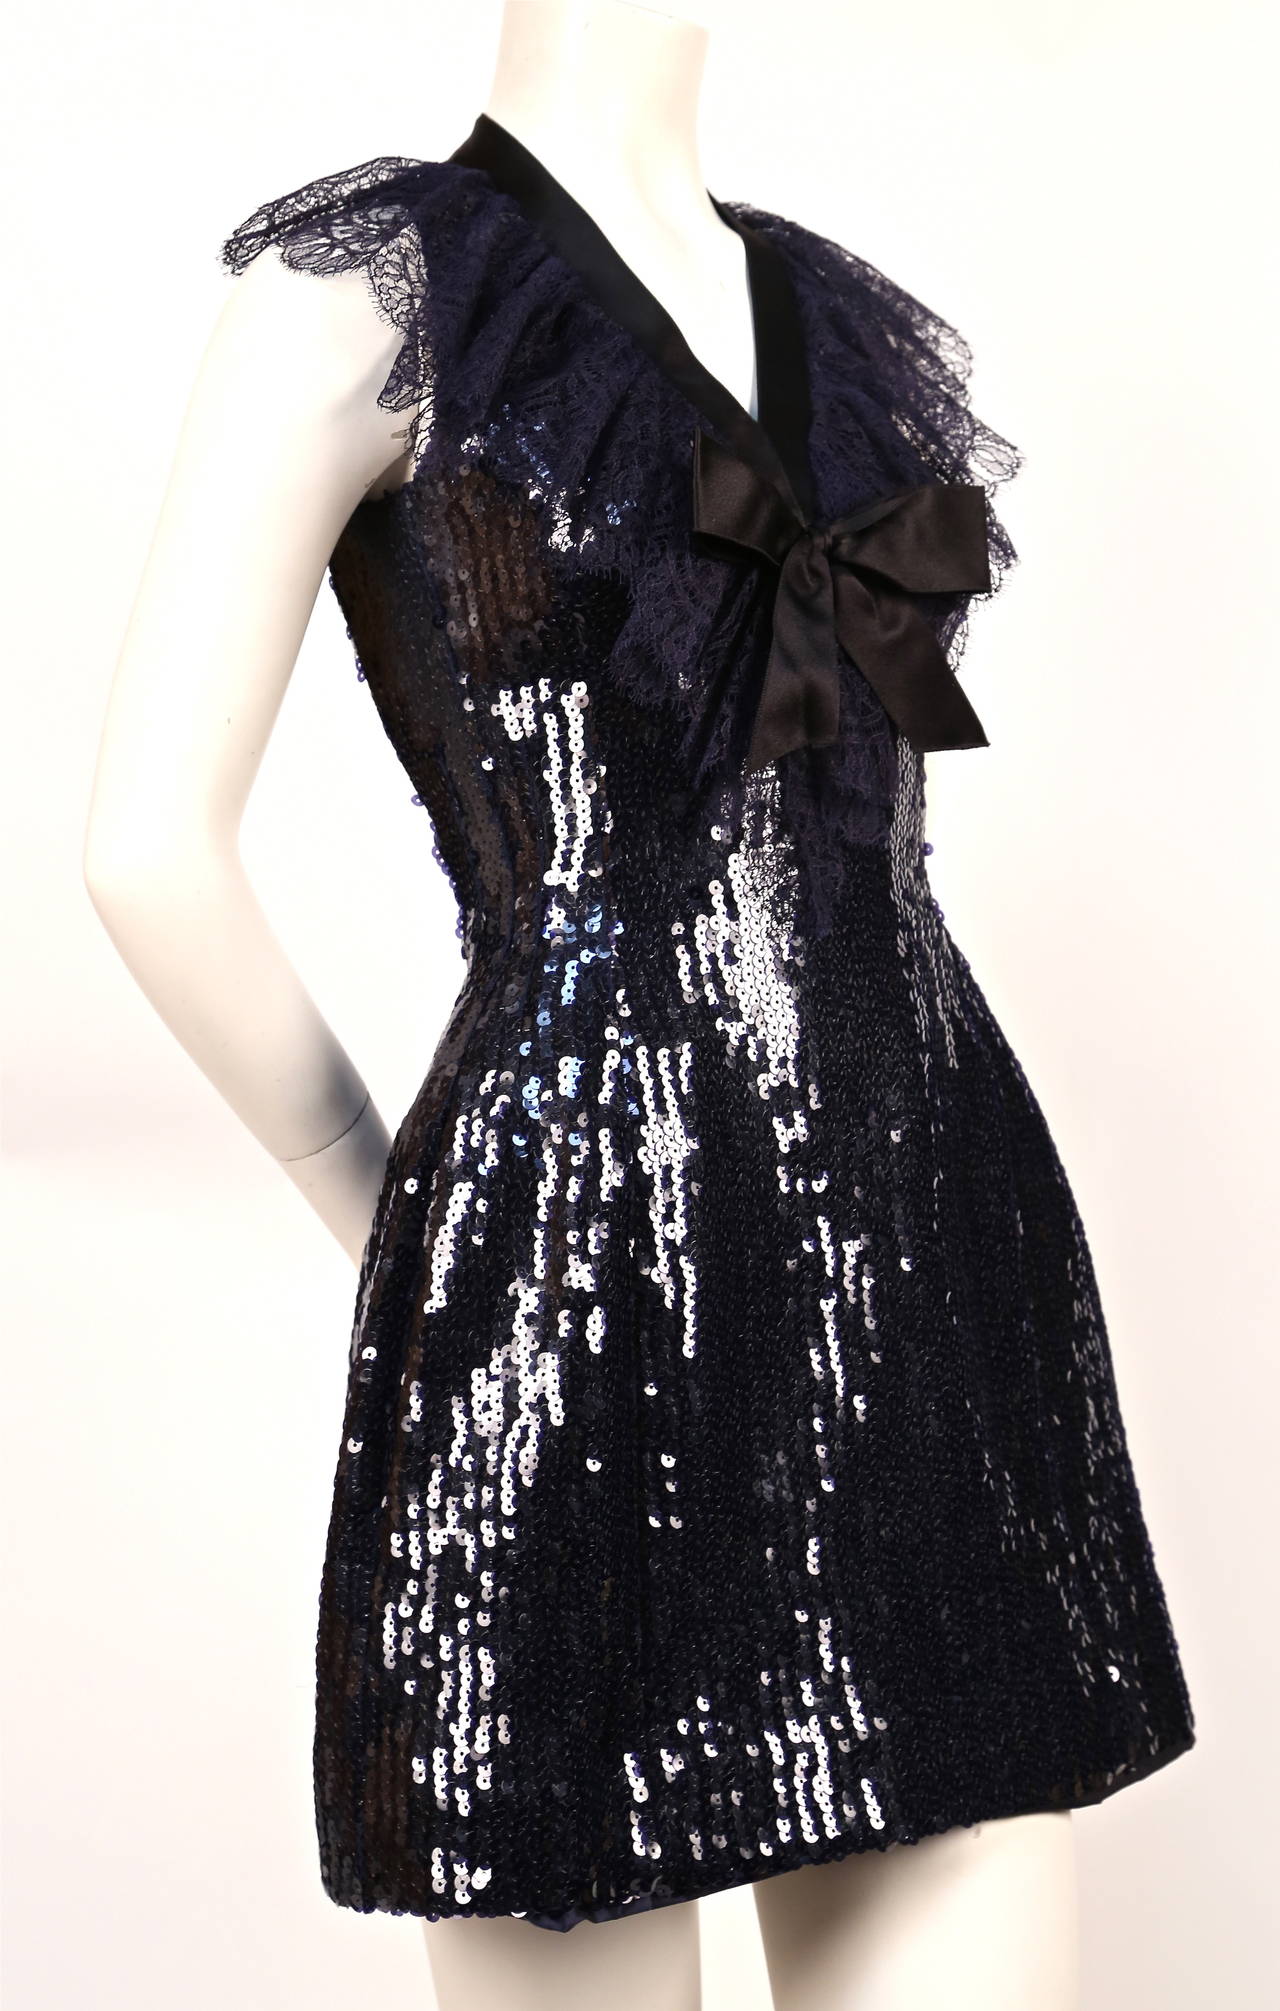 Very rare navy blue sequined mini dress with chantilly lace collar and black satin bow from designed by Karl Lagerfeld for Chanel dating to 1987. French size 34 which best fits a US 2. Approximate measurements: bust 30